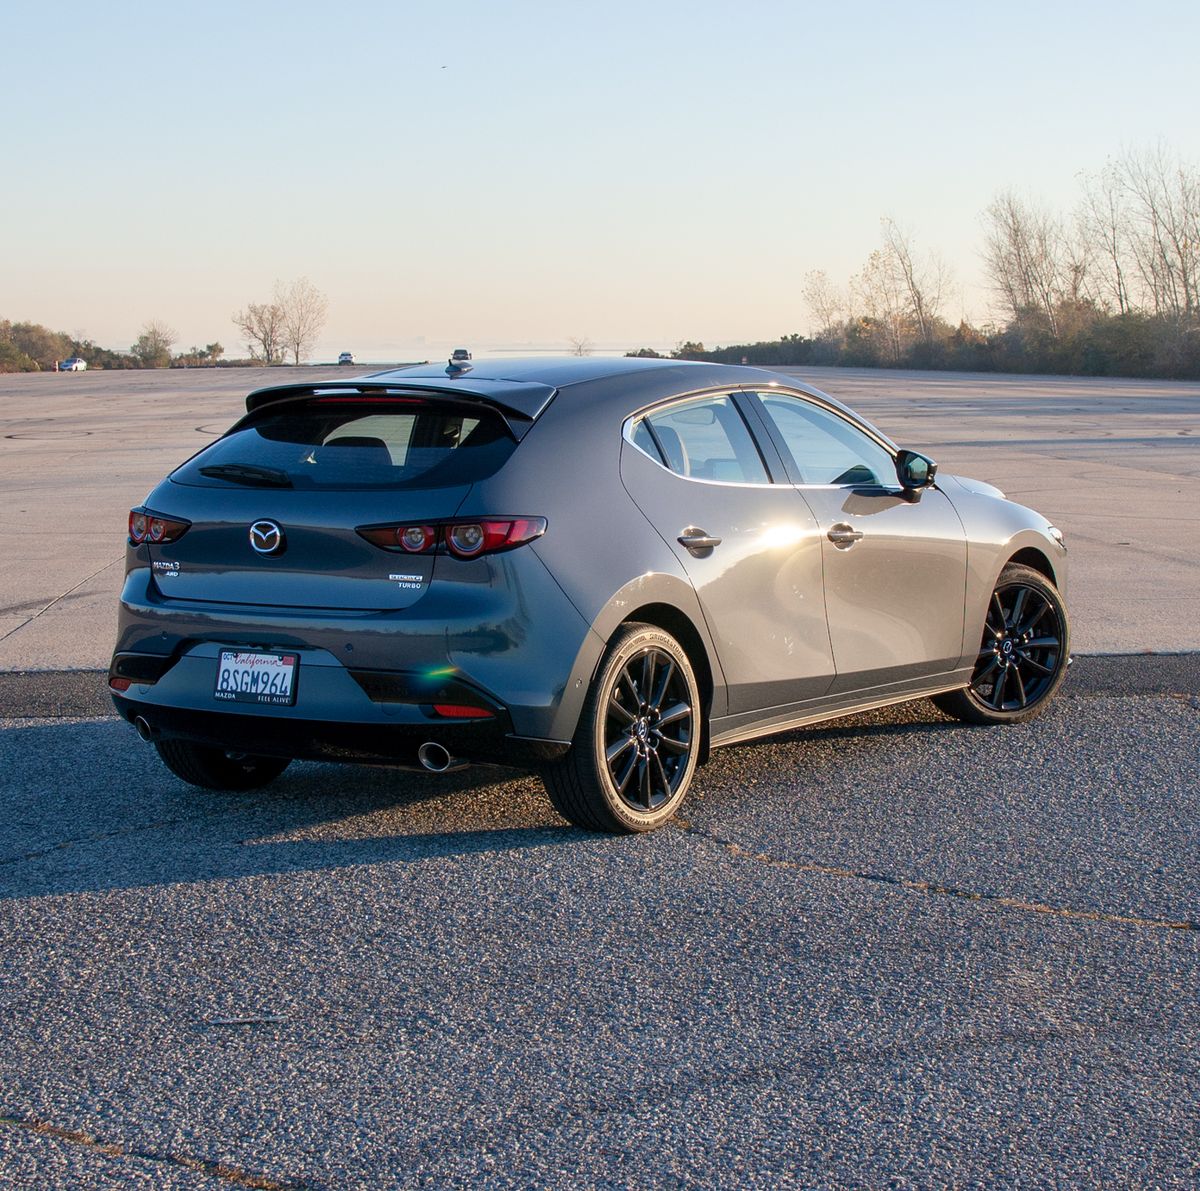 2021 Mazda 3 Turbo Review: the Sporty Hatch, All Grown up